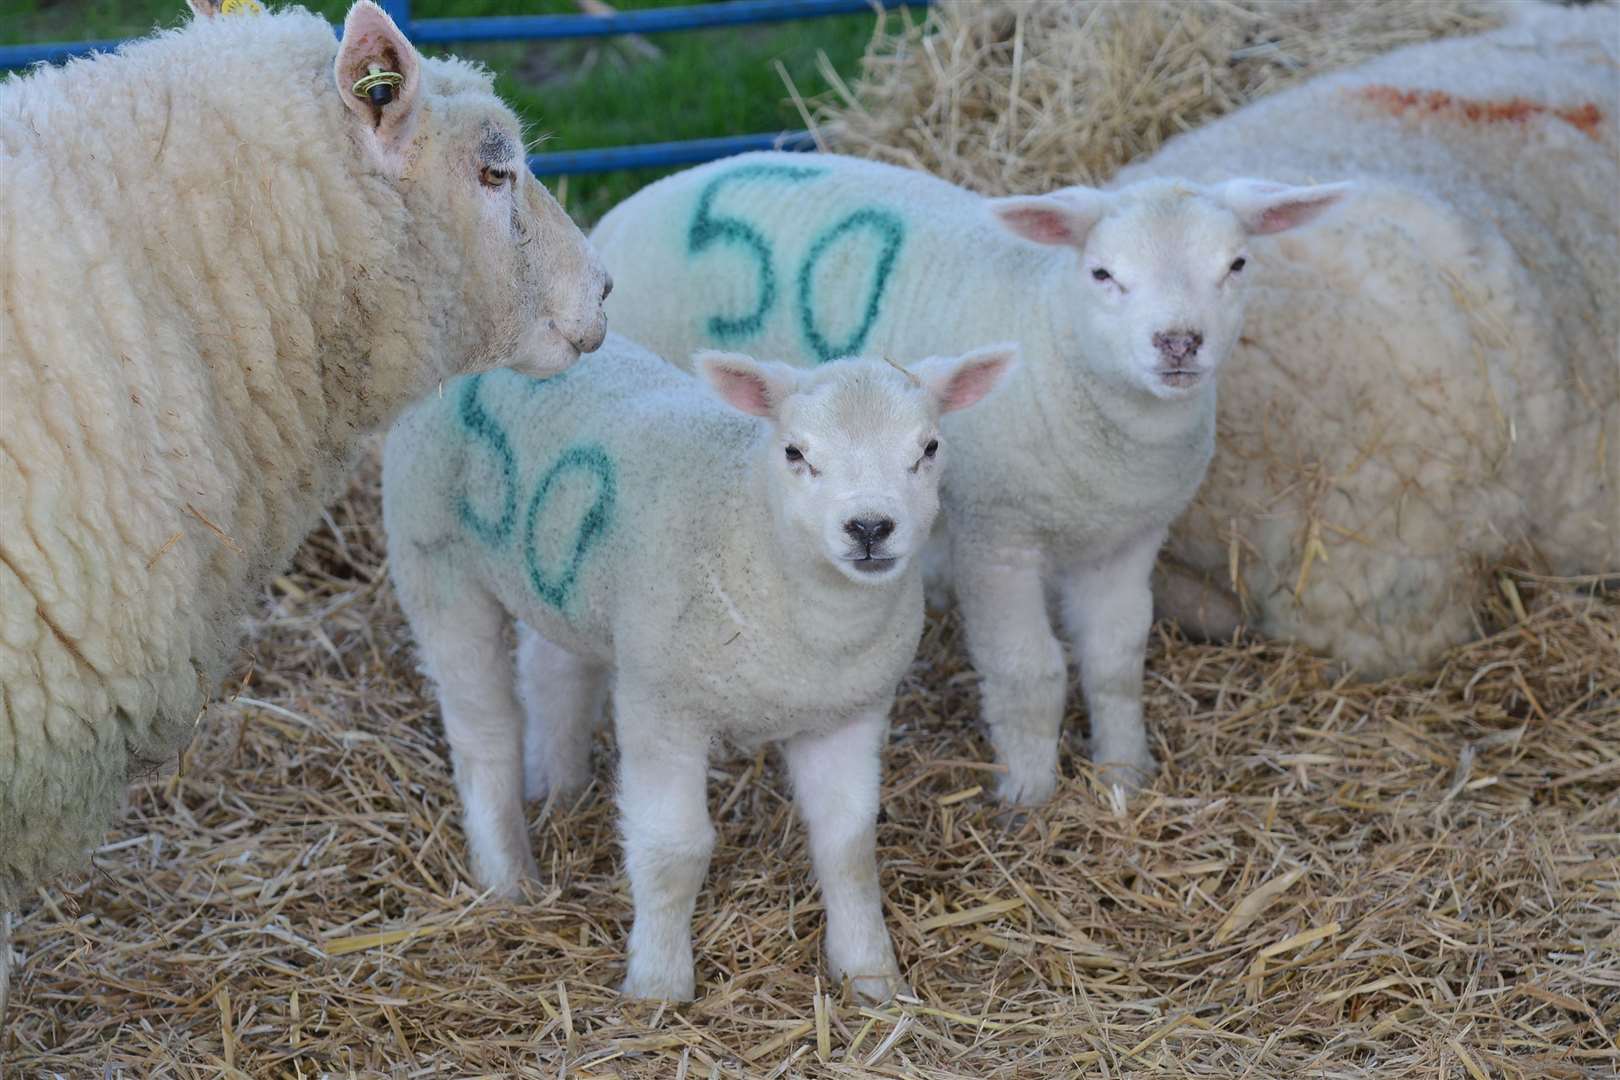 Head along to the lambing day in Ashford